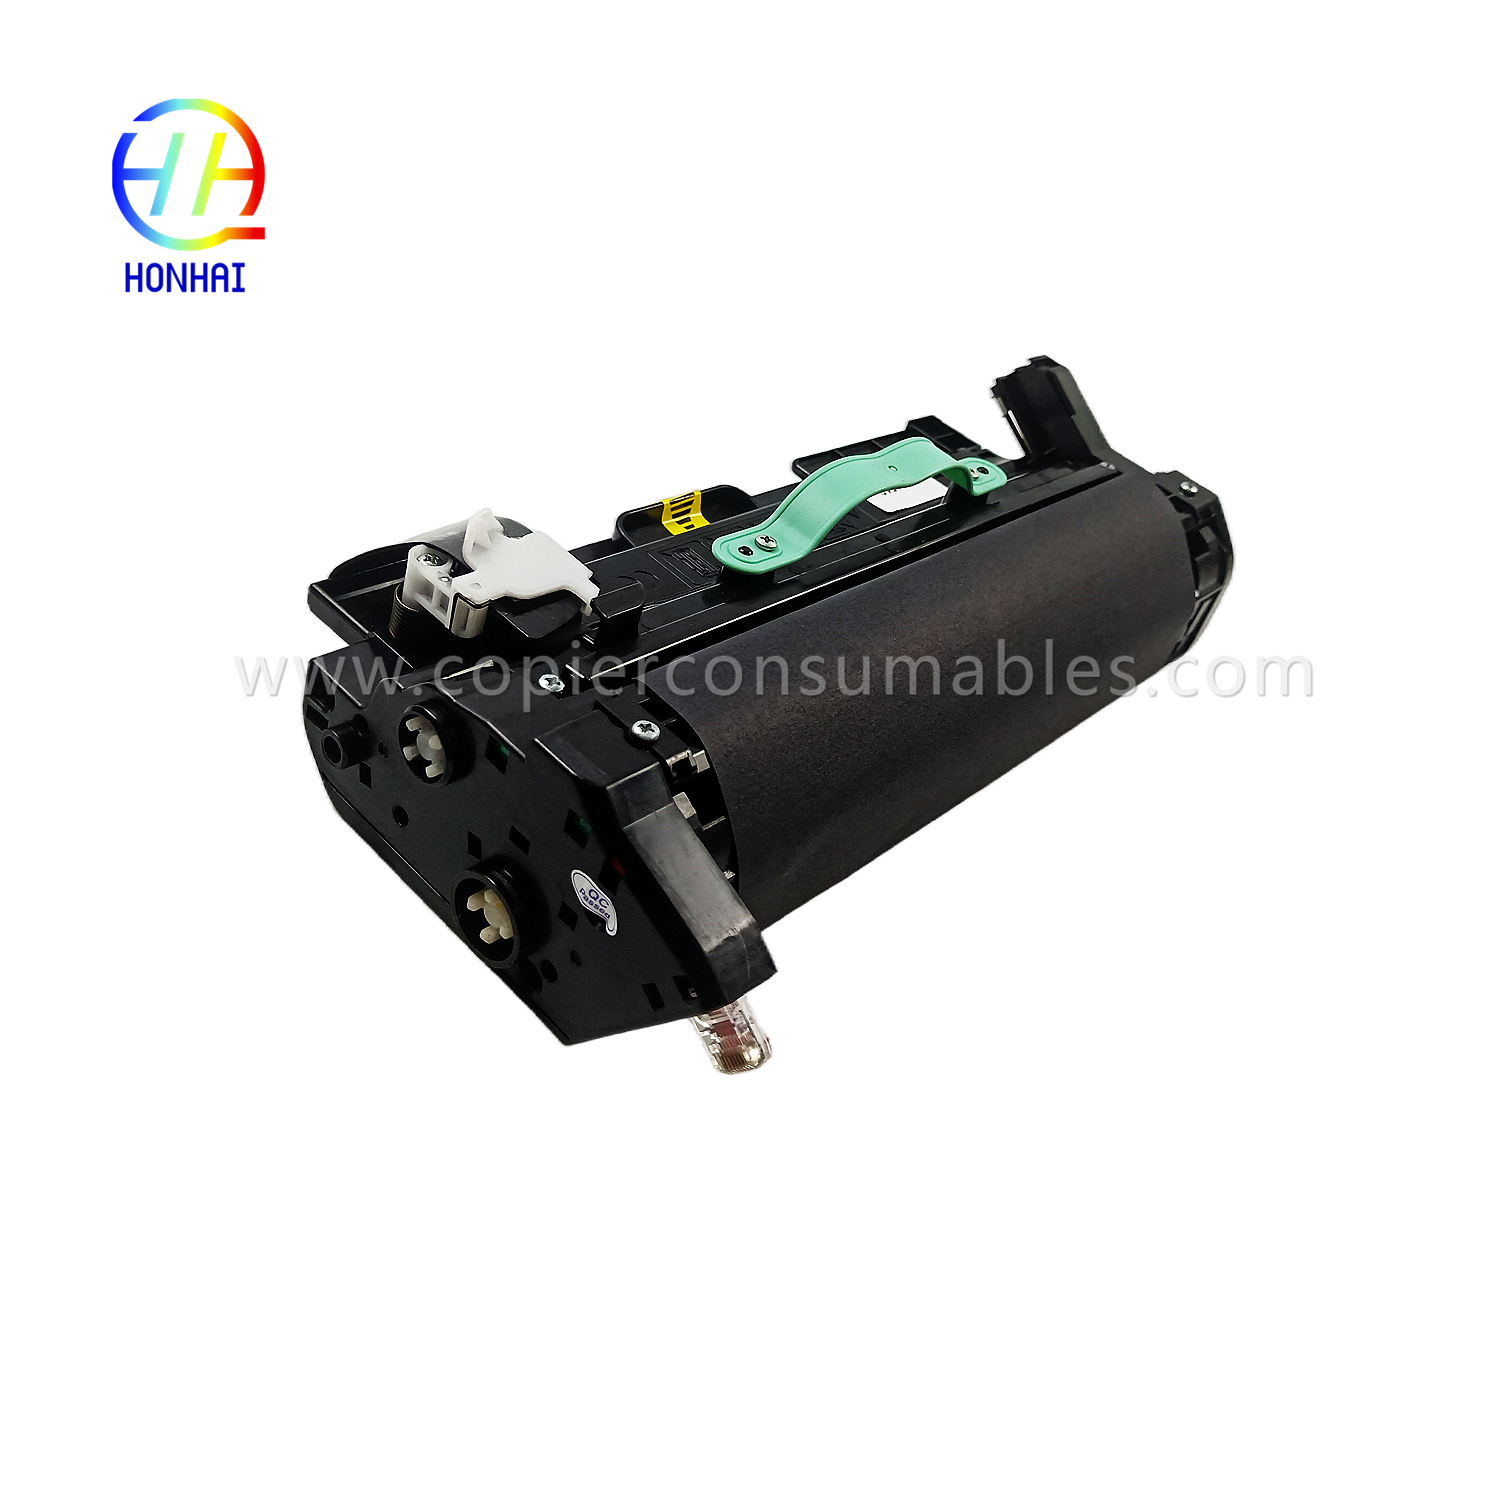 https://www.copierconsumables.com/fuser-unit-for-samsung-ml4510-ml4512-ml-4510nd-ml-4512nd-ml-4510-ml-4512-jc91-01028a-fusing-assembly-2-product/